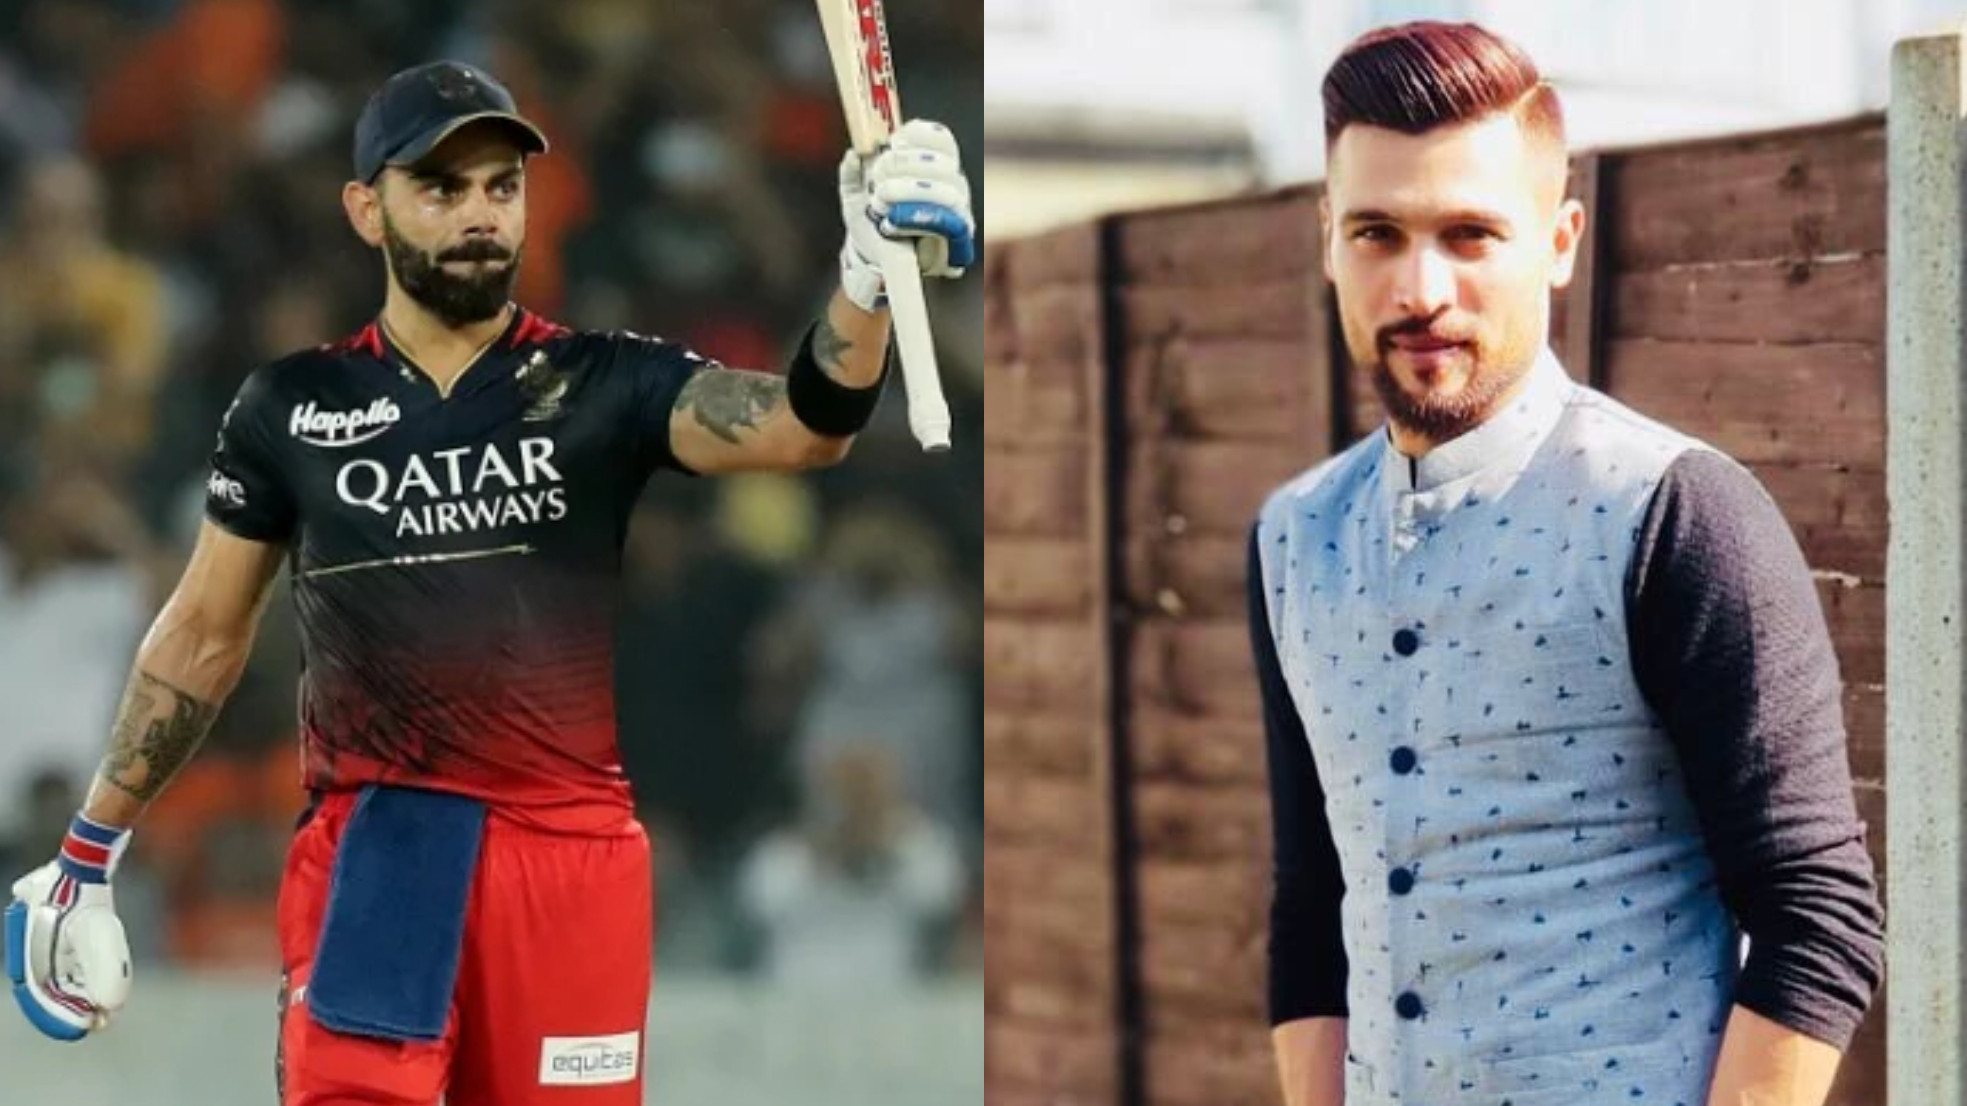 IPL 2023: “One and only the real king, take a bow,” - Mohammad Amir lauds Virat Kohli after his 6th IPL ton